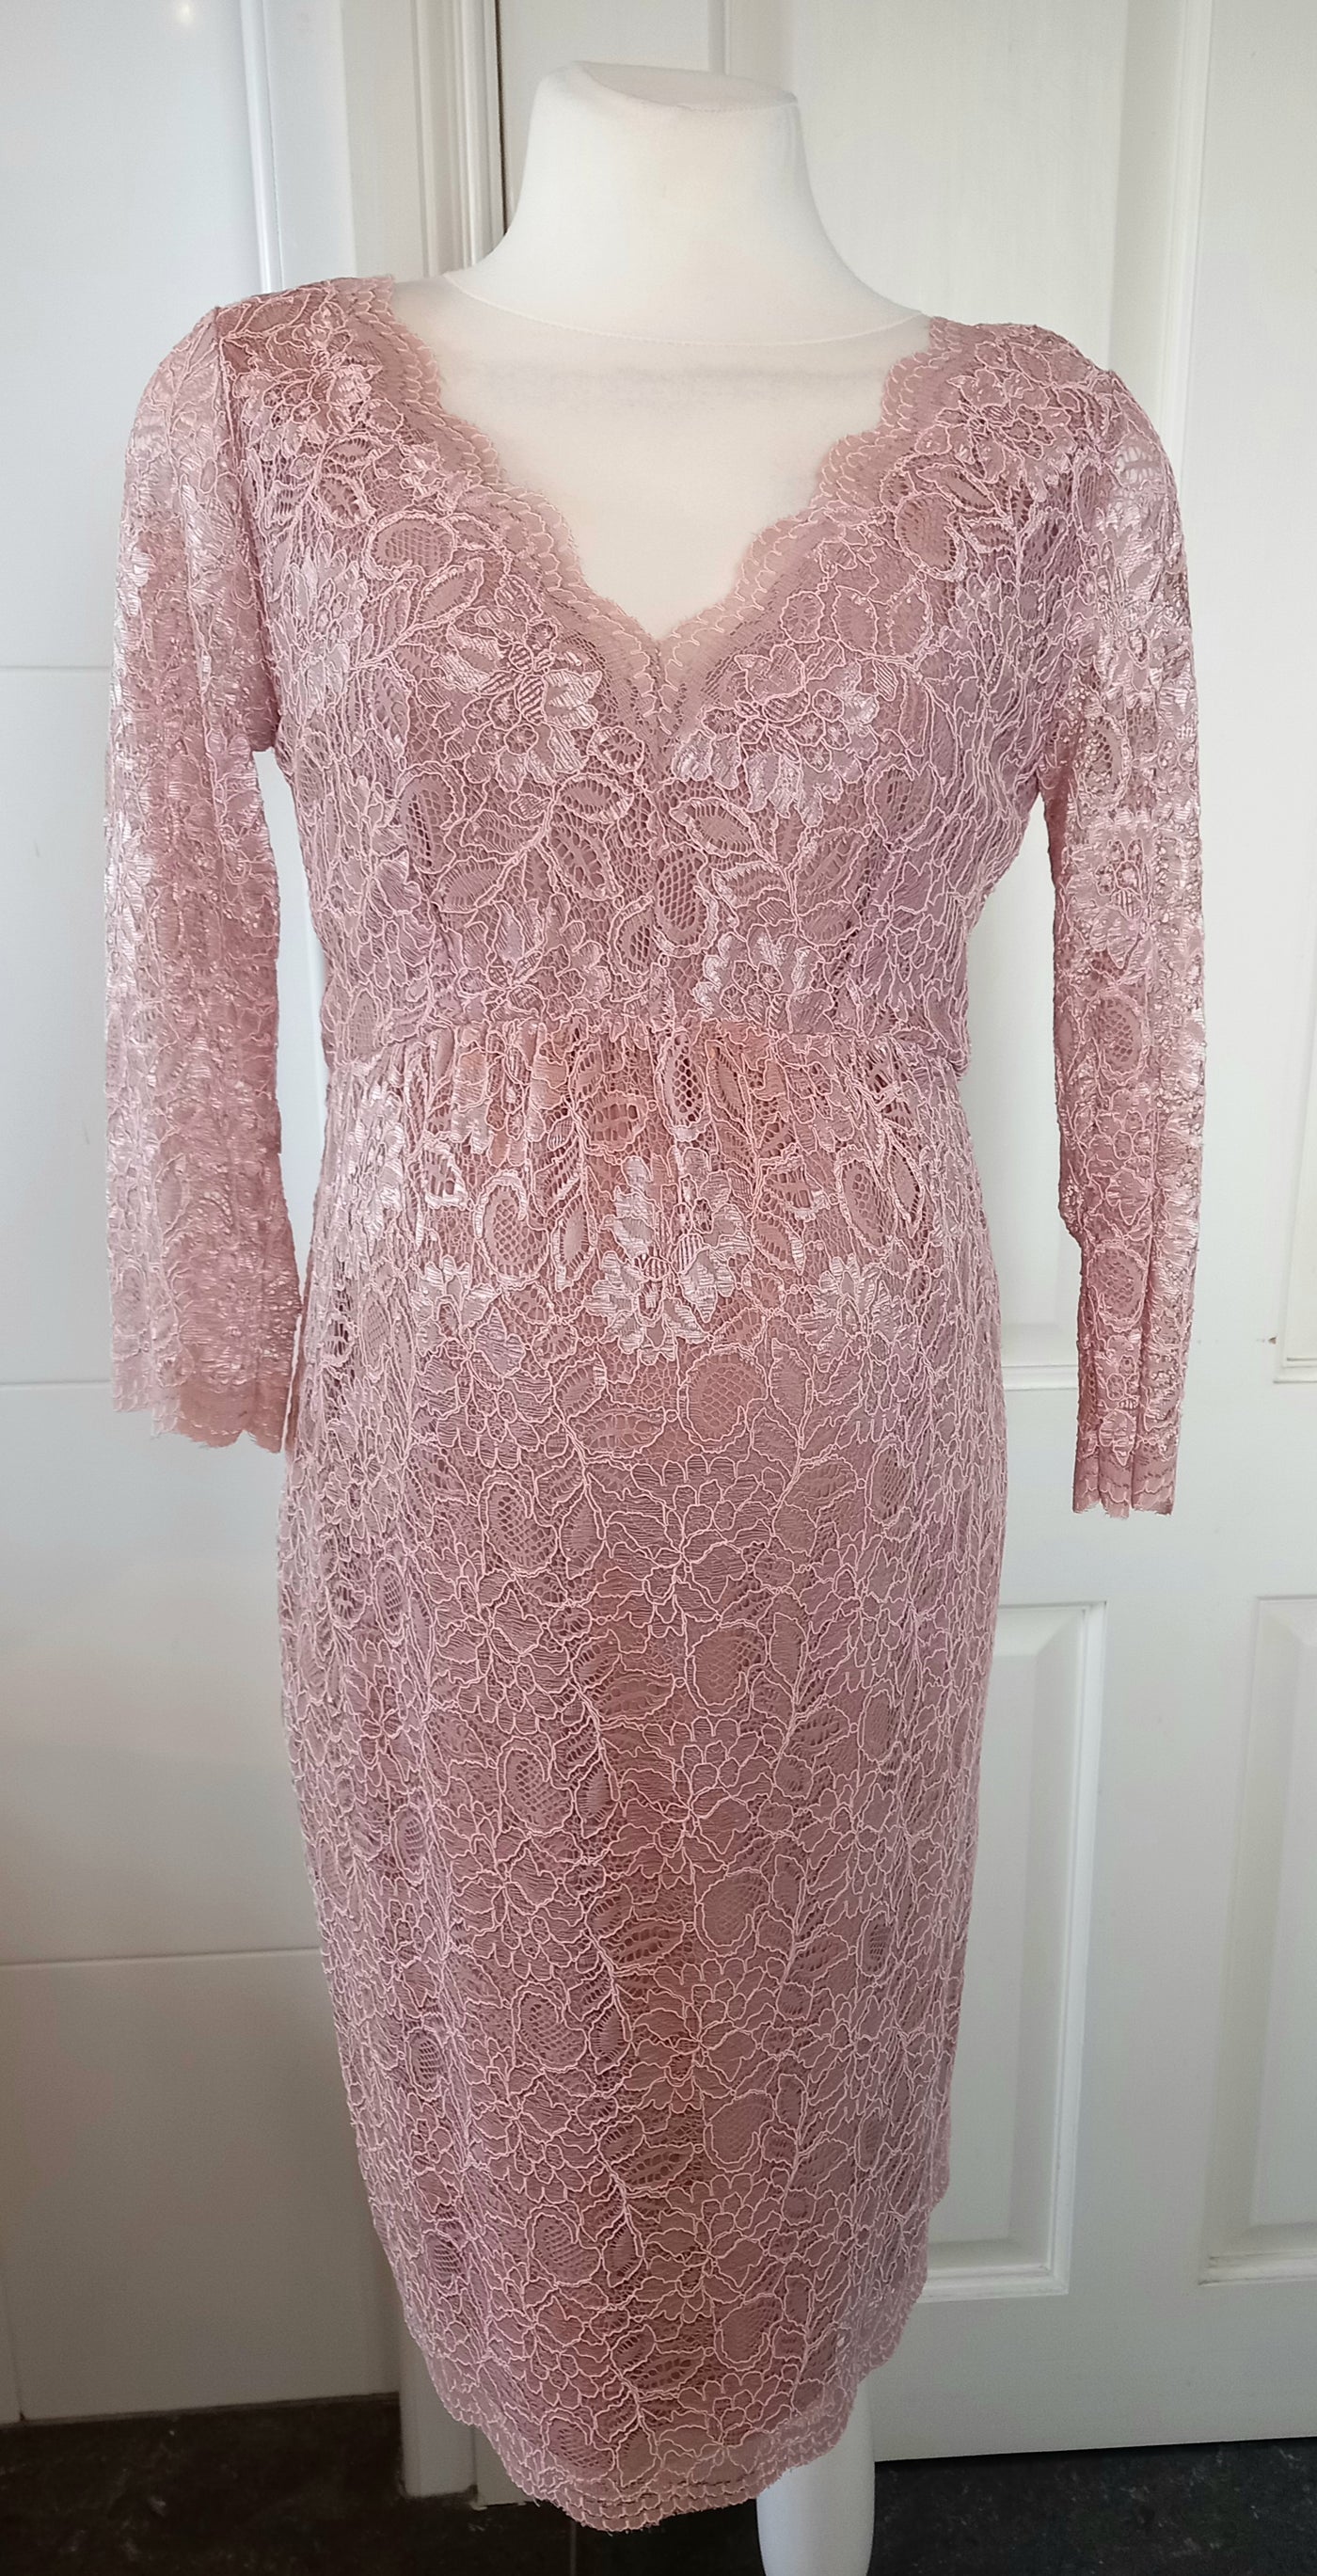 Tiffany Rose Chloe Lace Dress in Orchid Blush - Size 3 (UK 12/14)